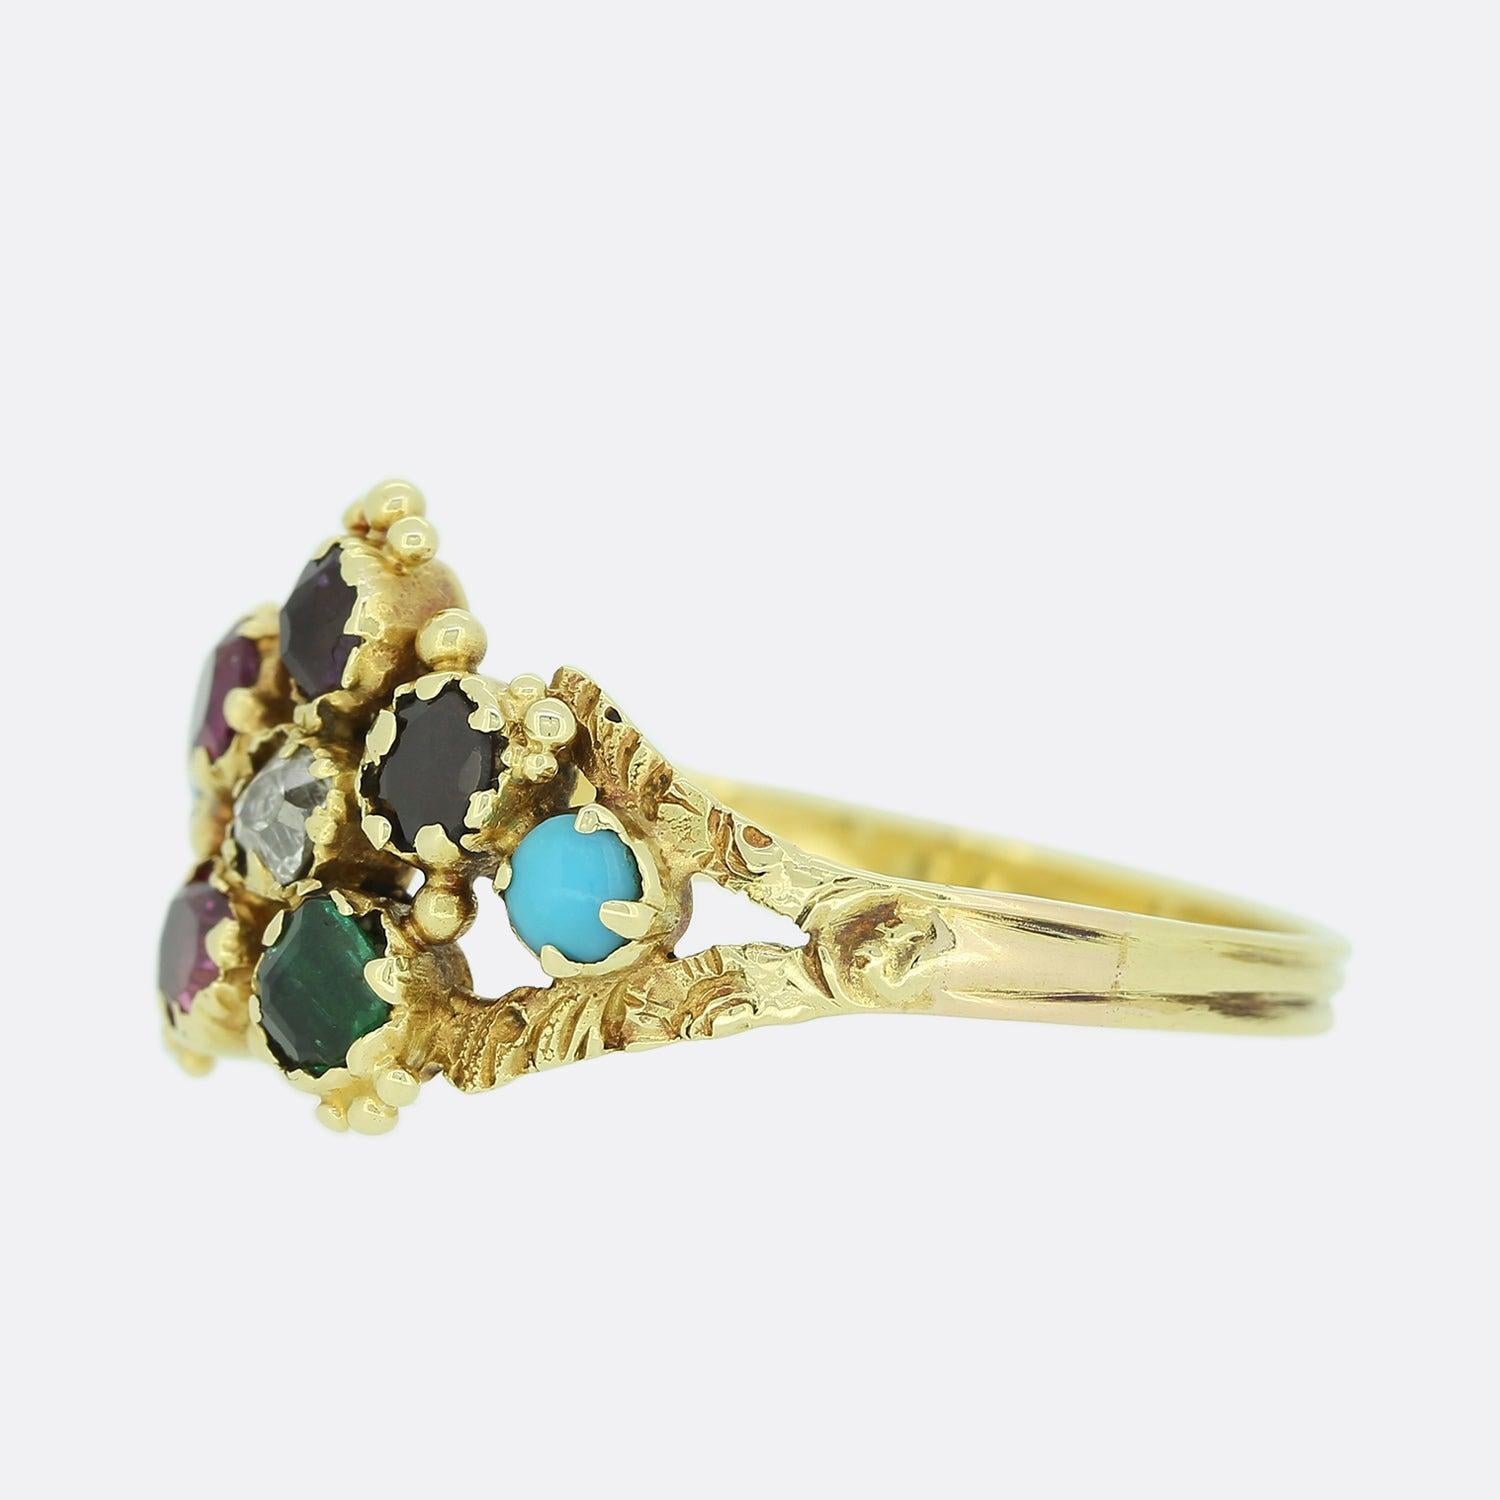 This is a wonderful 15ct yellow gold Georgian Regard cluster ring. The ring dates back to the late Georgian era. Circa. 1820s and features stunning engraving and granulation and plays host to six gemstones which spell out the word Regard. (R)uby,